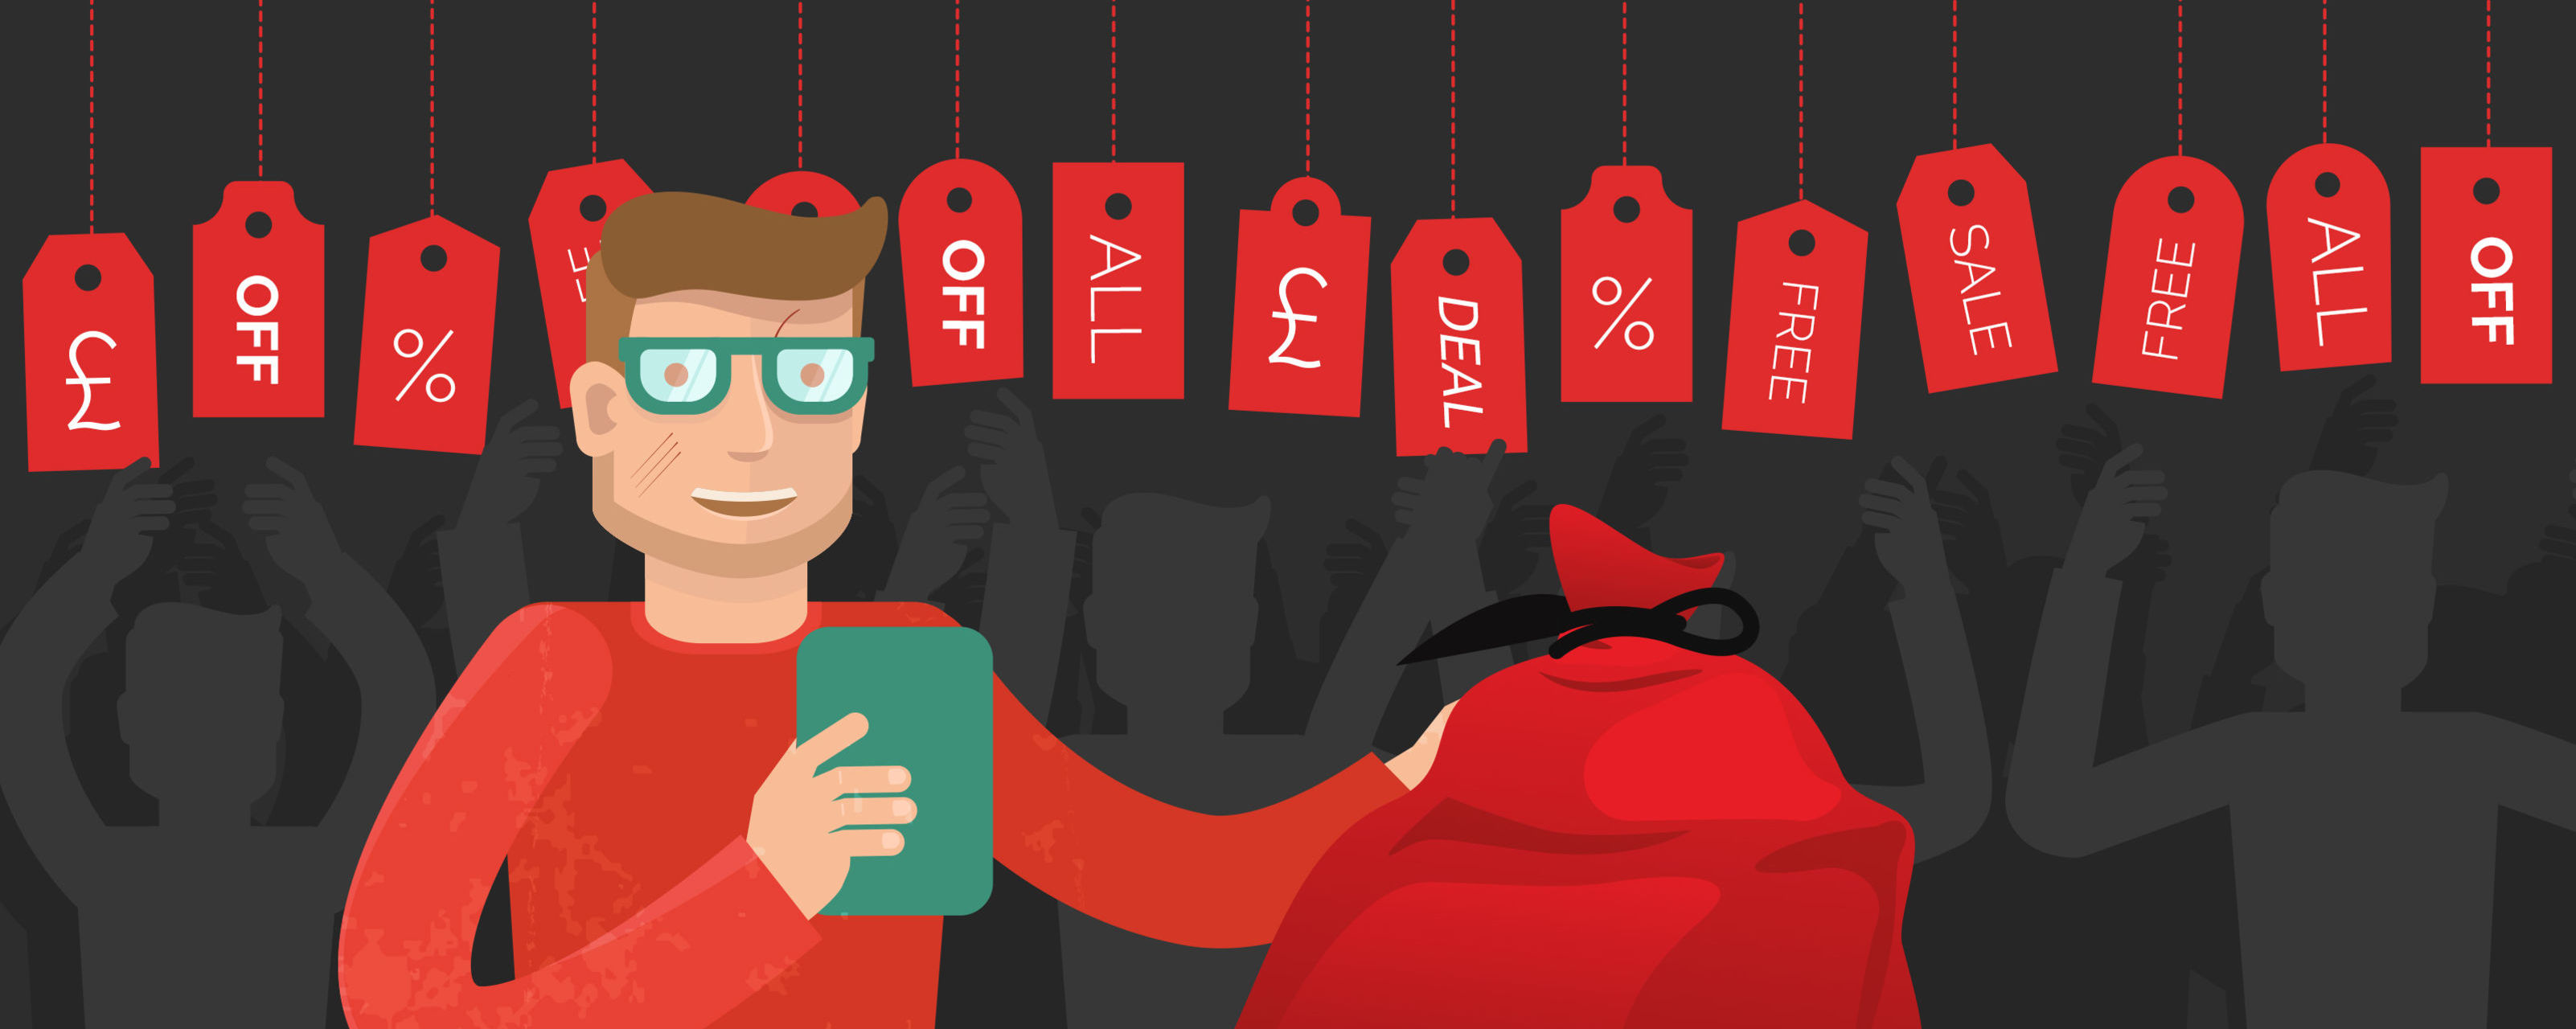 Black Friday & Cyber Monday - How to Survive